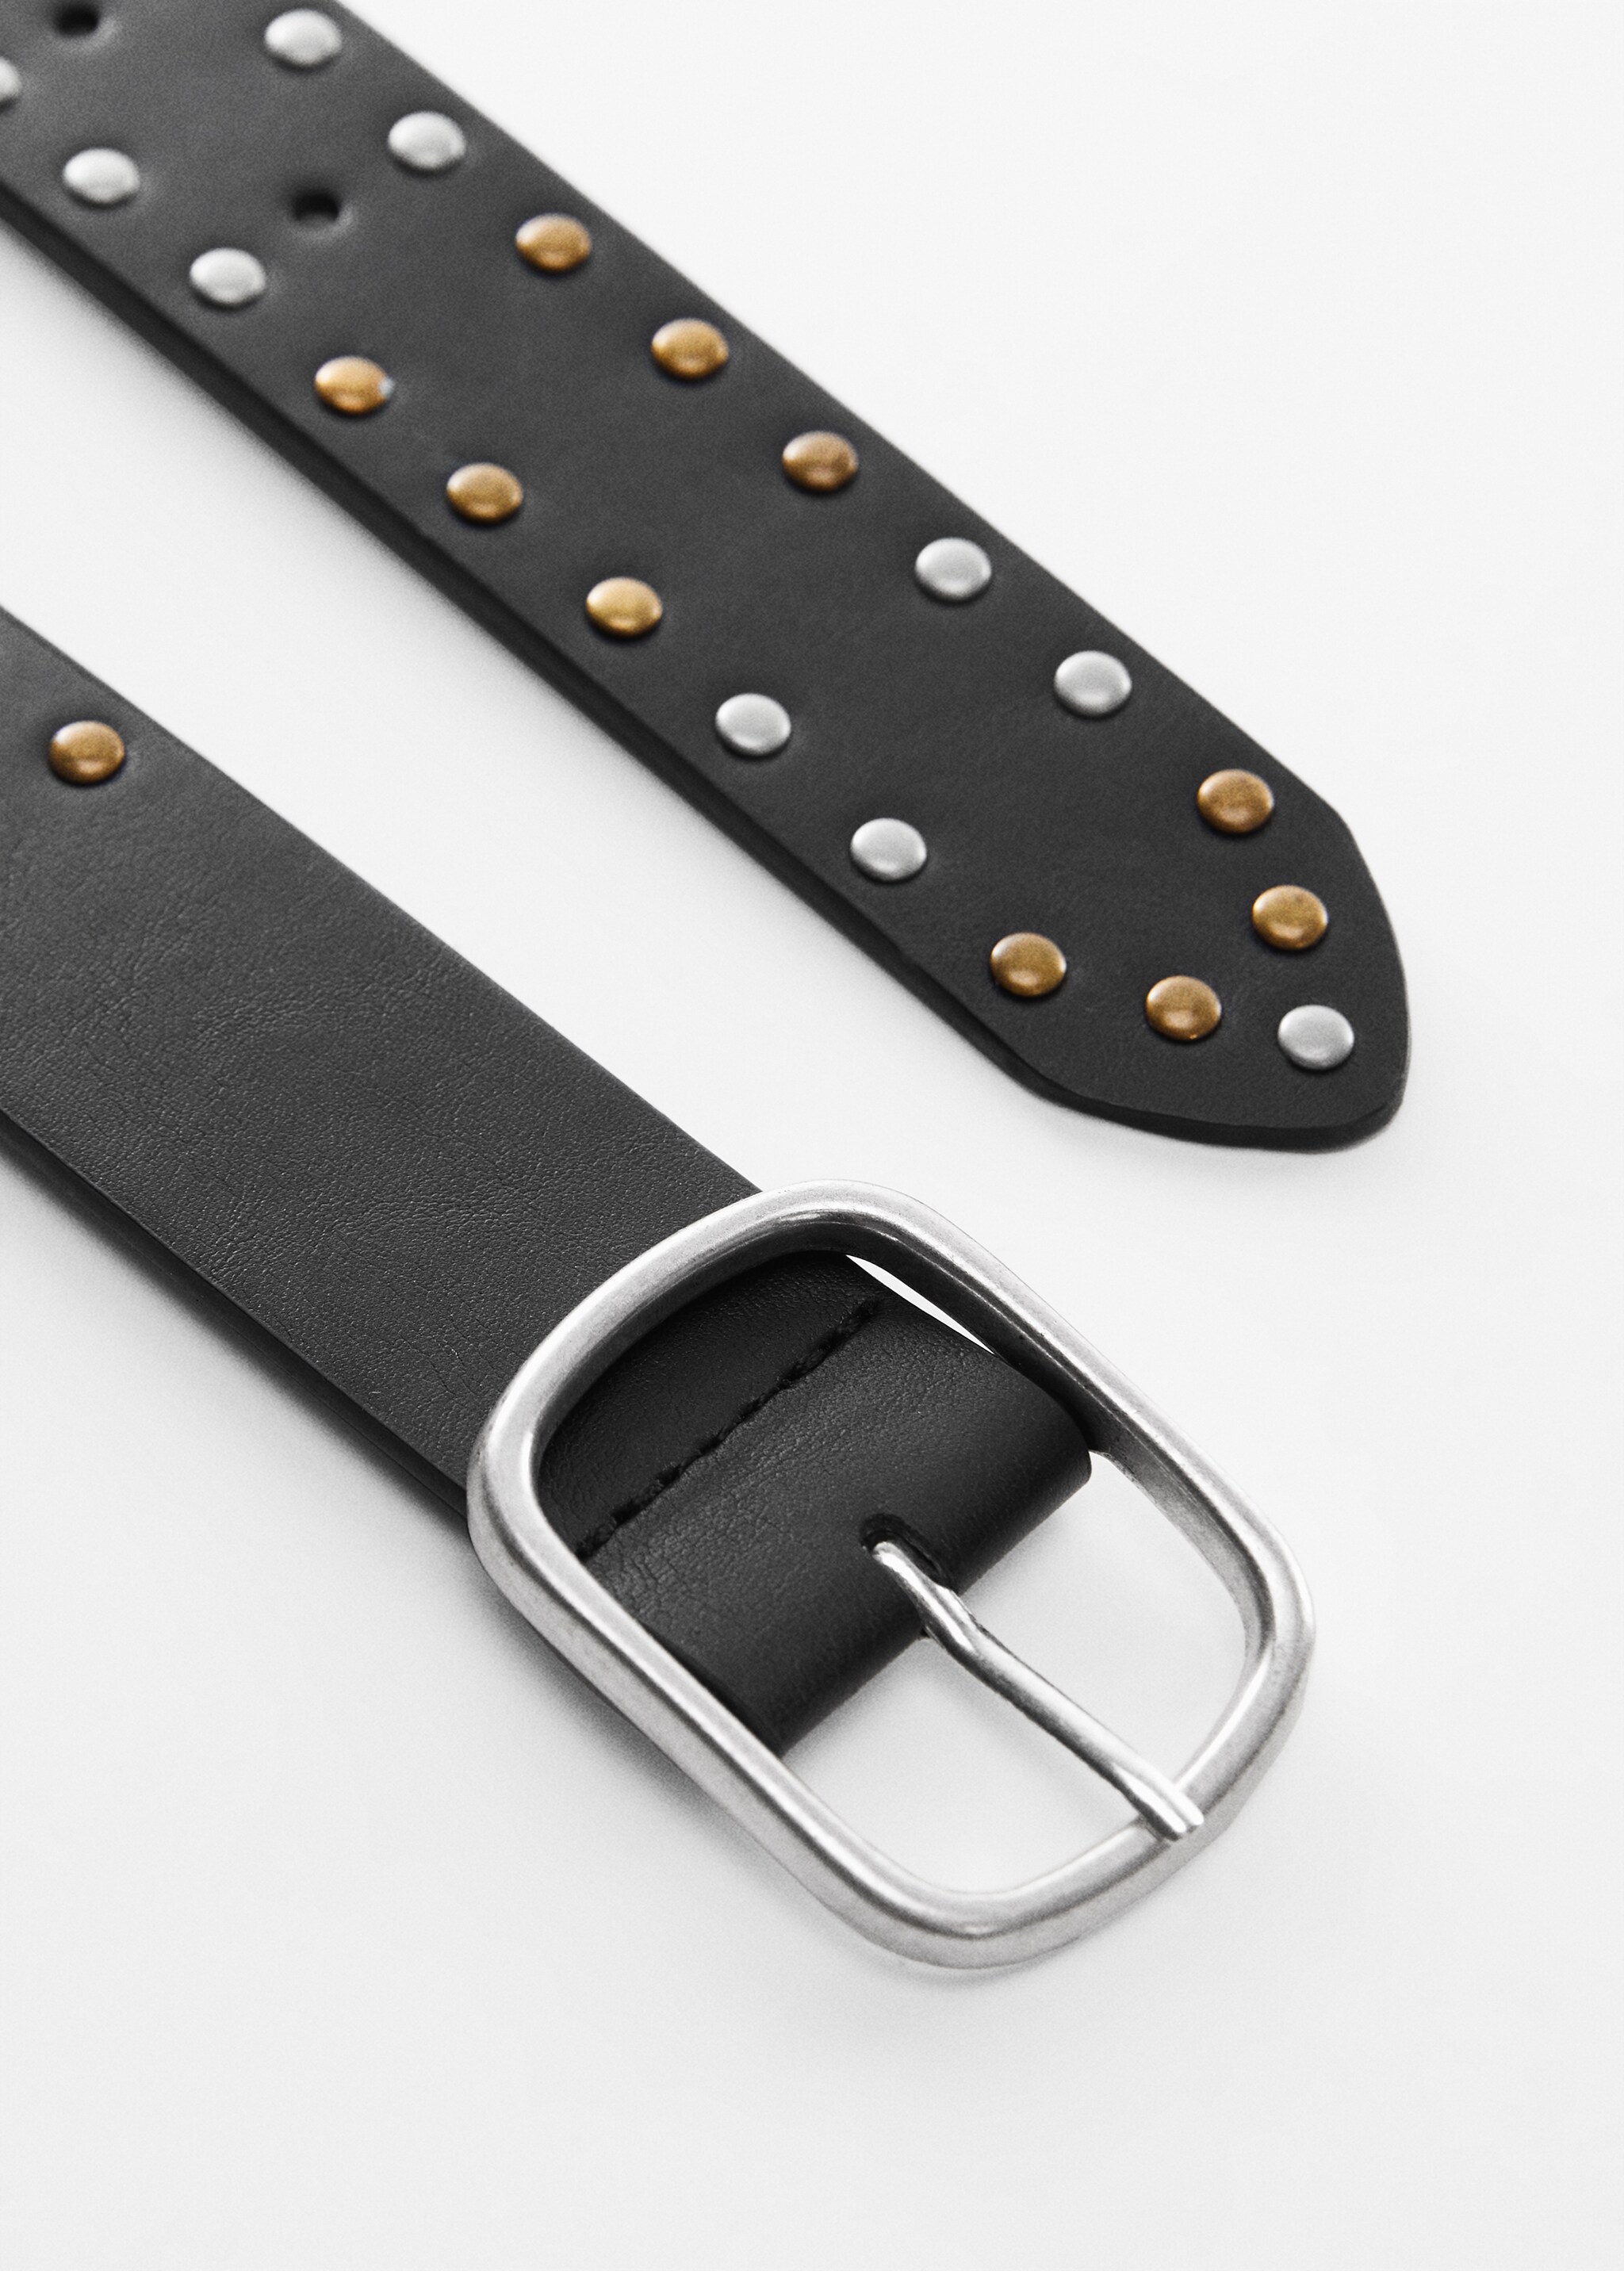 Studded belt - Details of the article 1